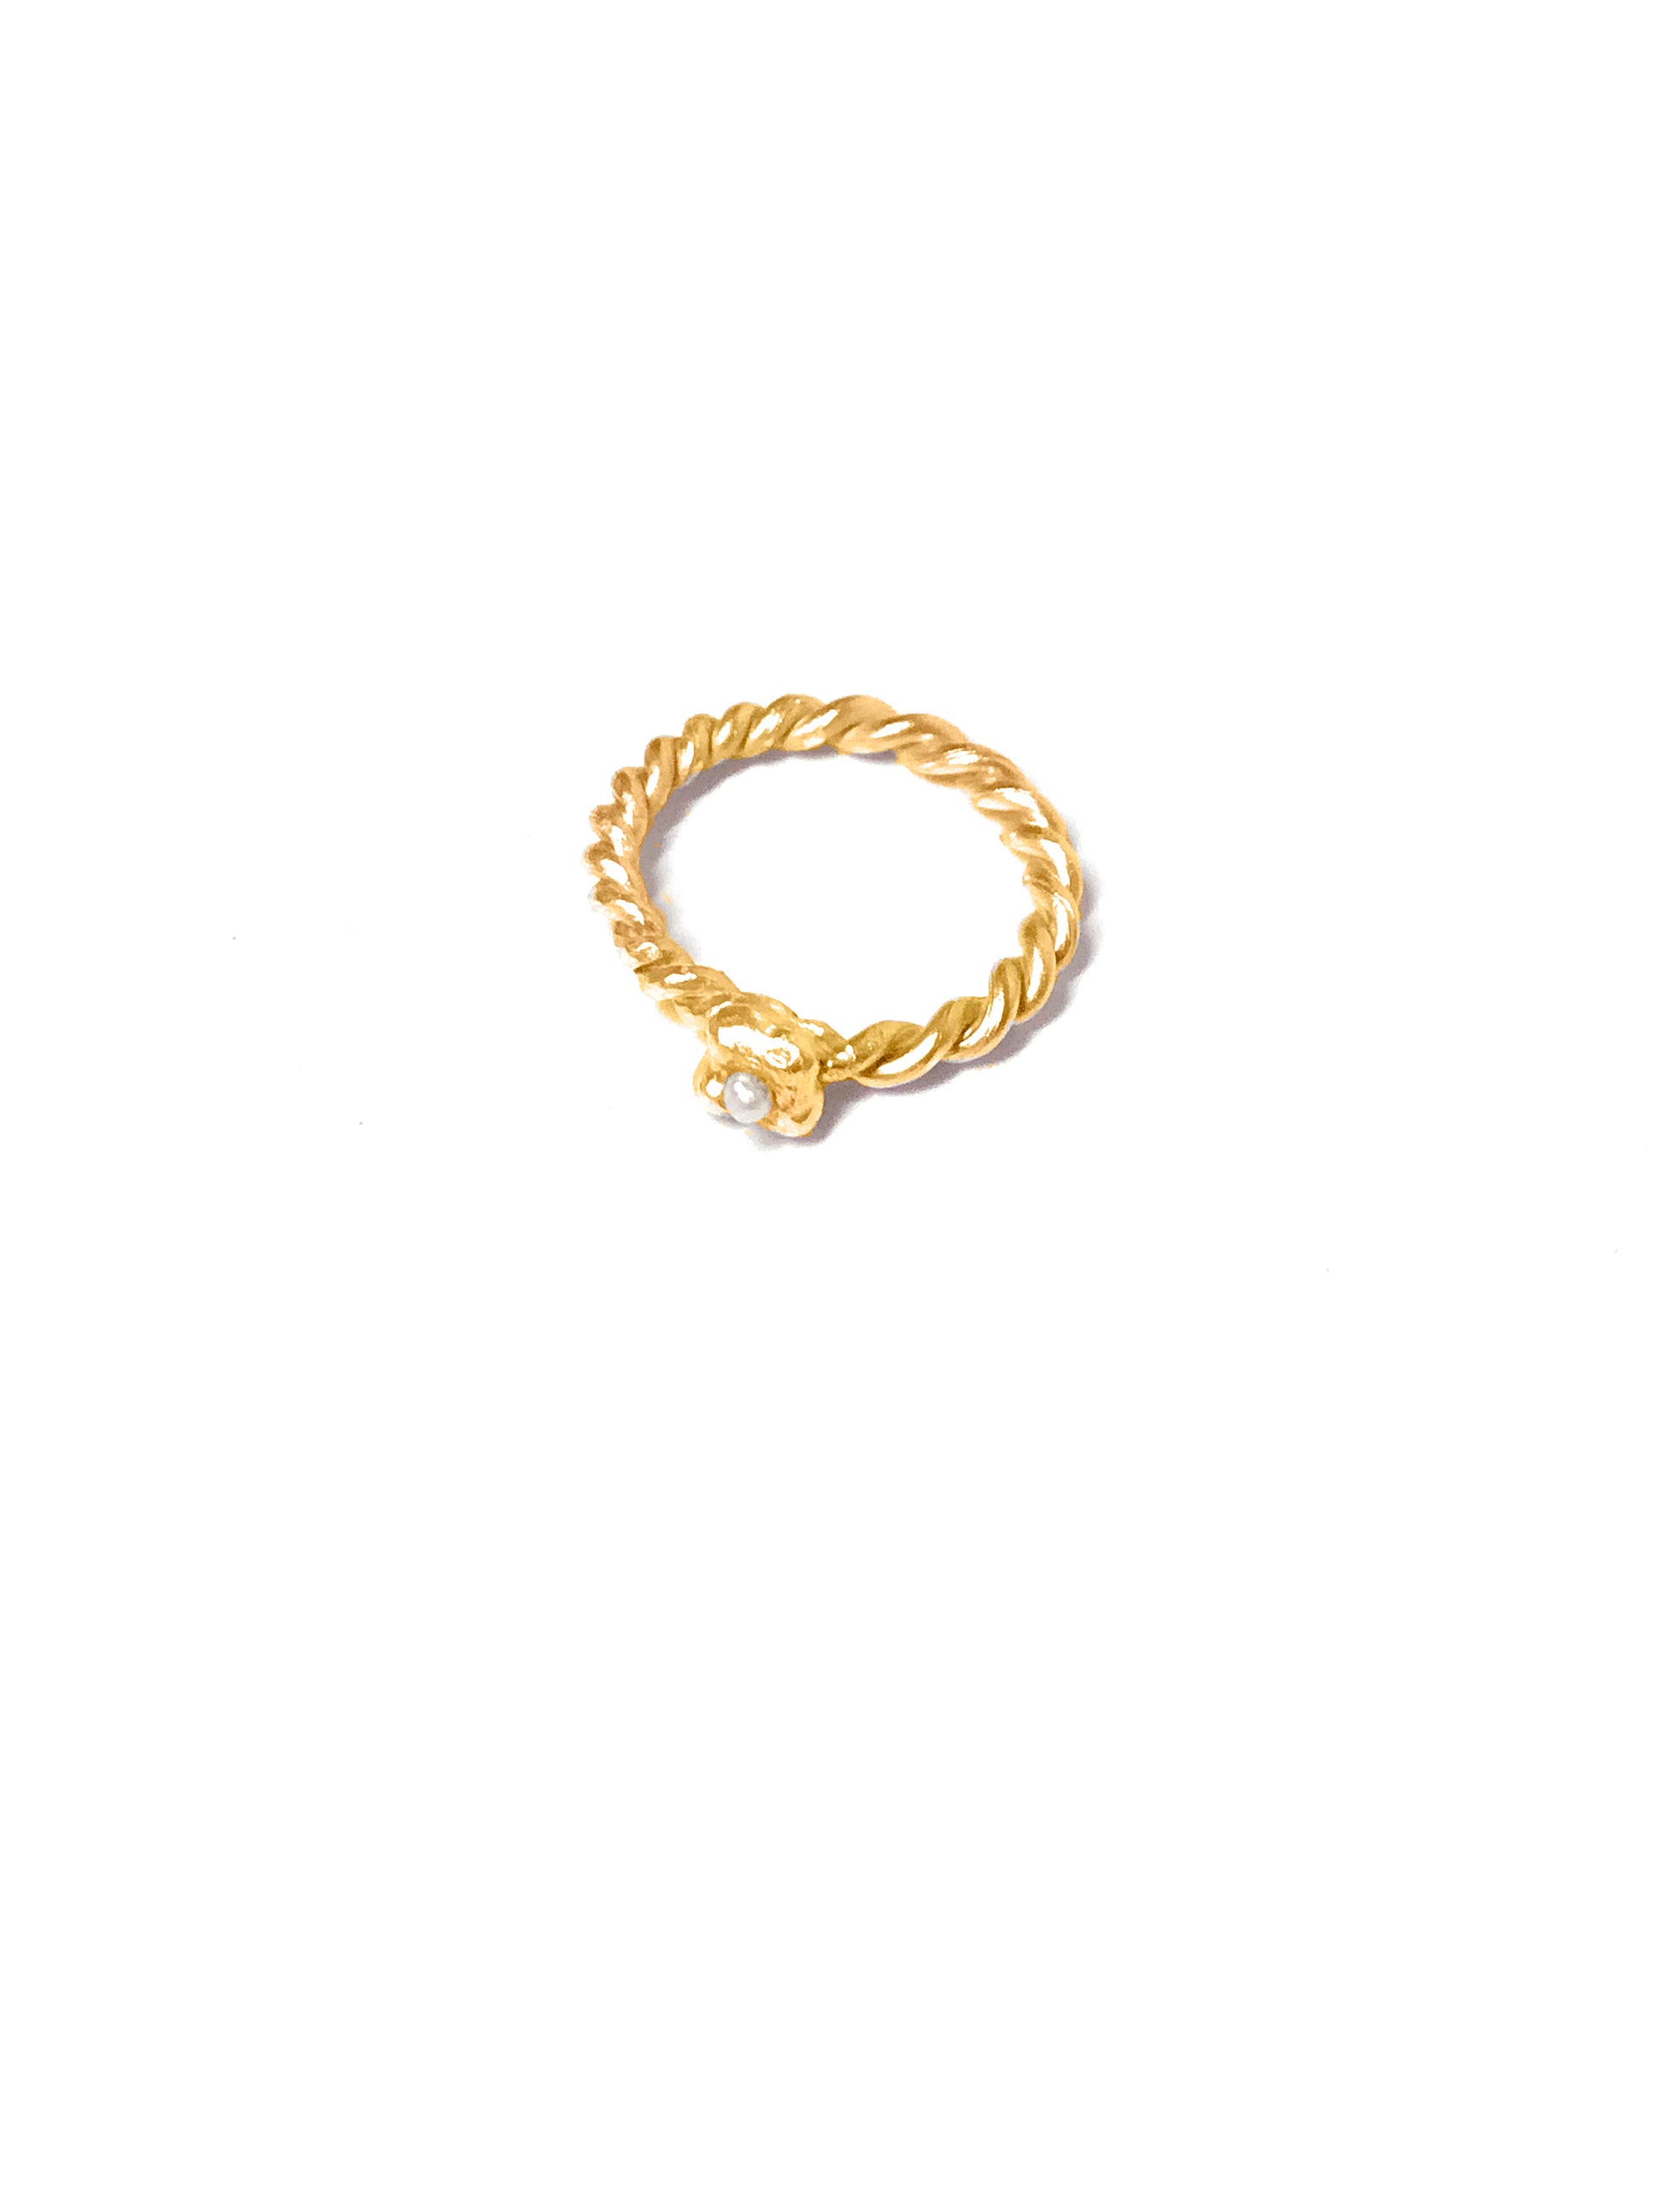 Product photo of Mini Mermaid Ring in 18k Gold Vermeil. This is a unique handmade ring. The tiny freshwater Pearl and twisted band looks like a mermaid tail.